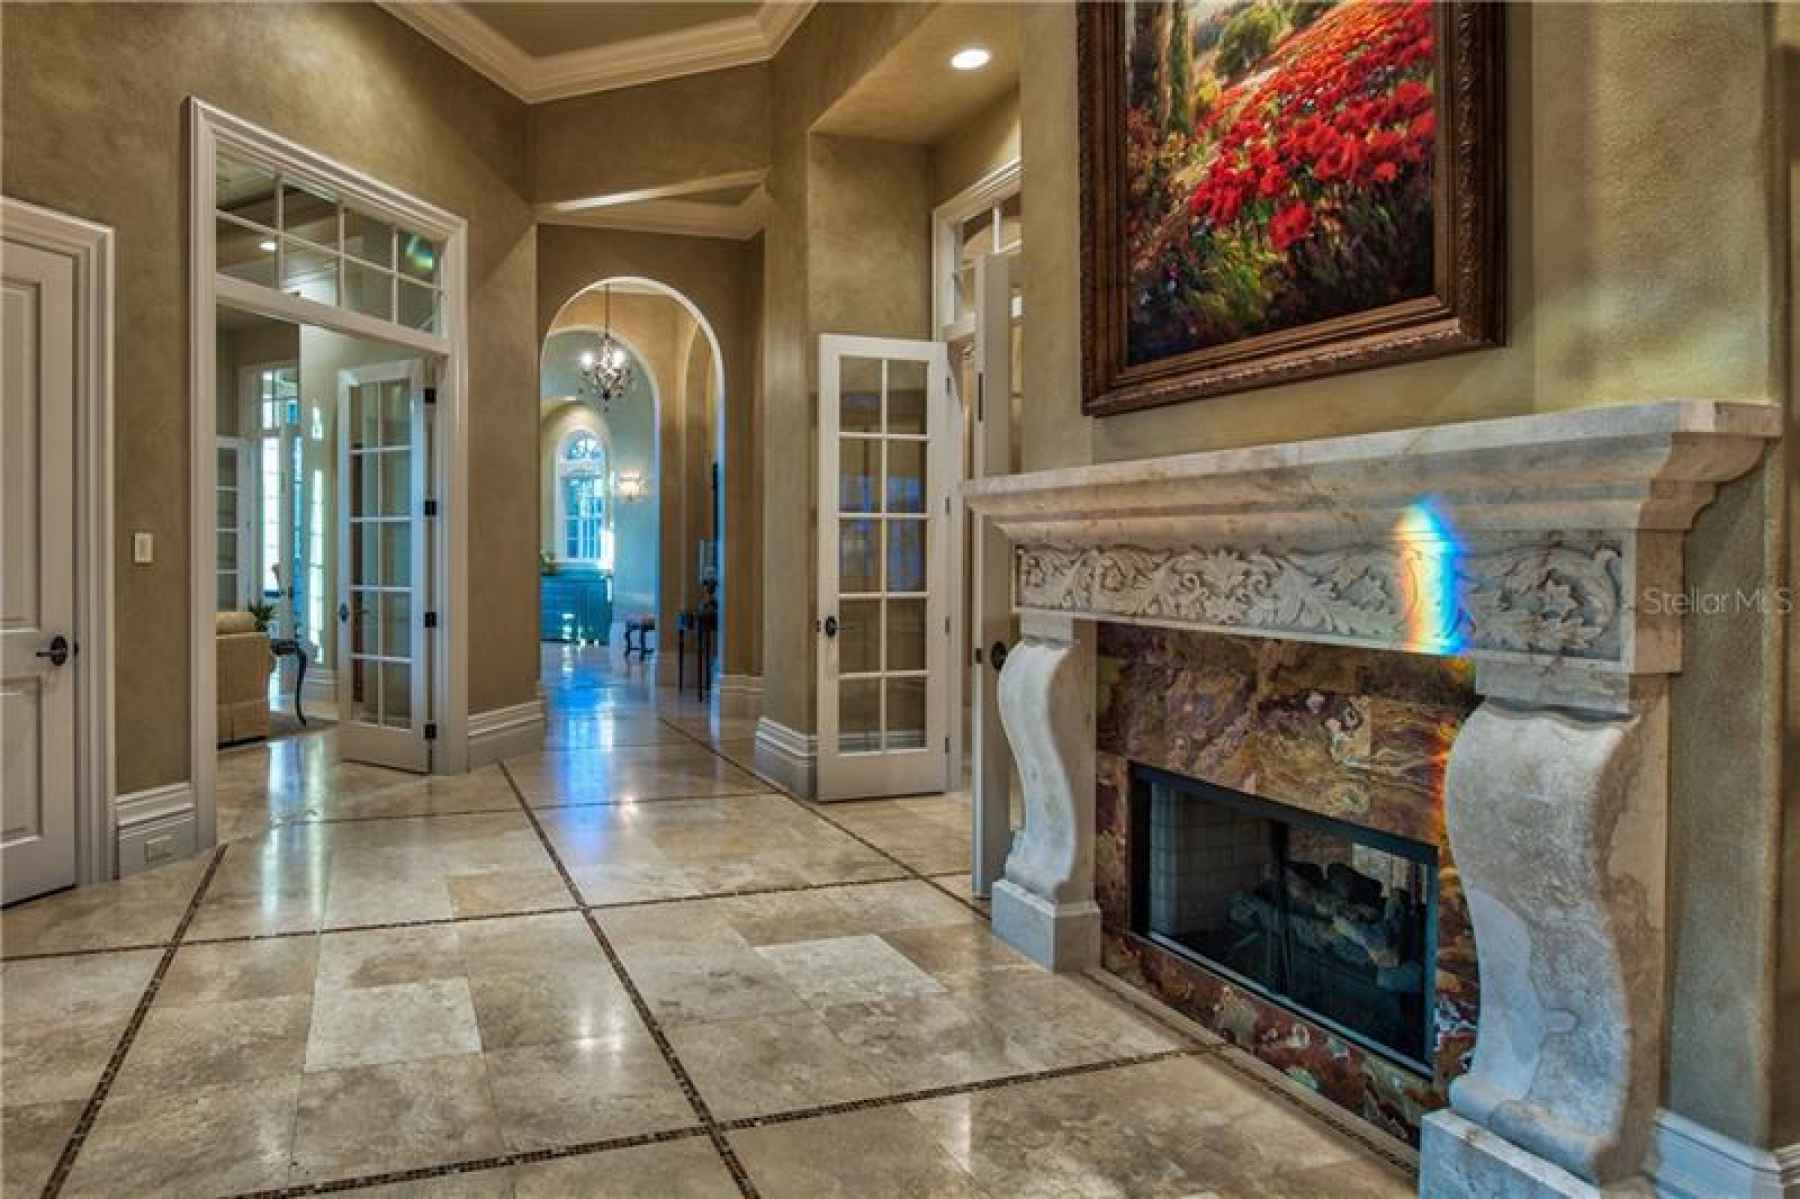 Marble Flooring with Mosaic Tile Inlays and Grande French Doors